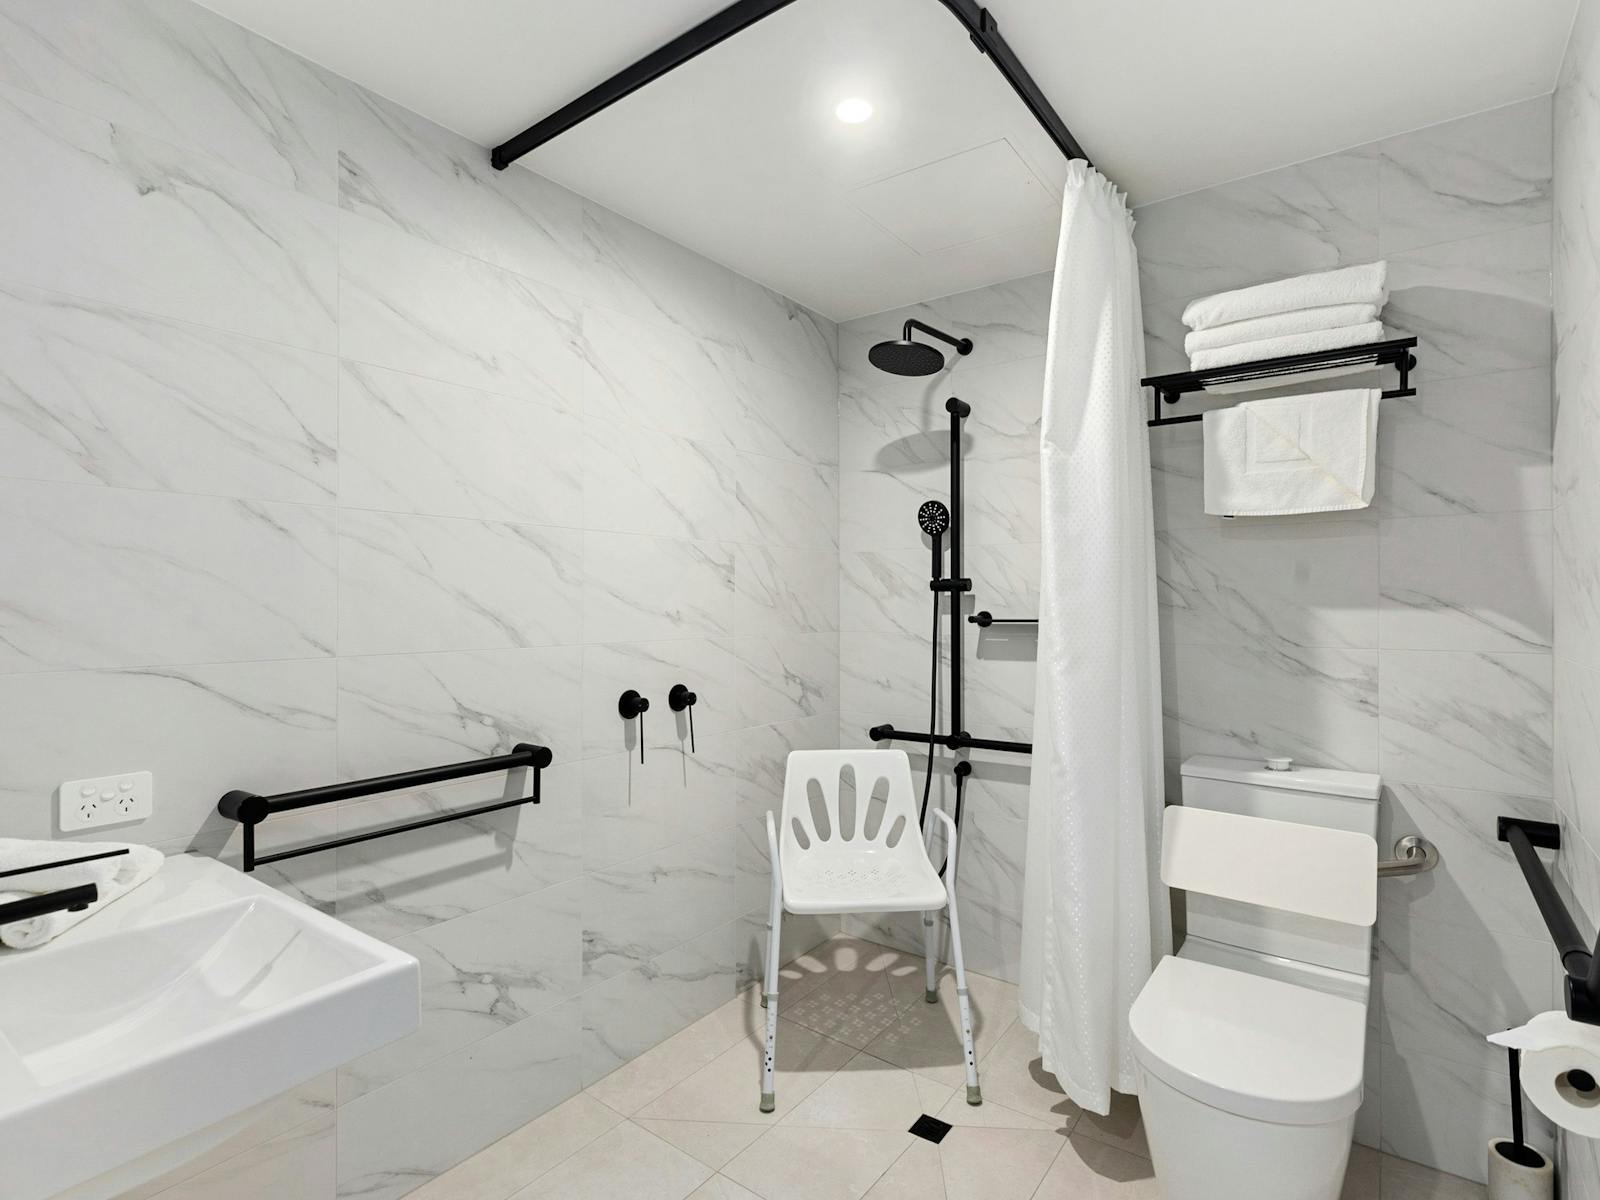 Bathroom showing special accessible features including shower, toilet and hand rails